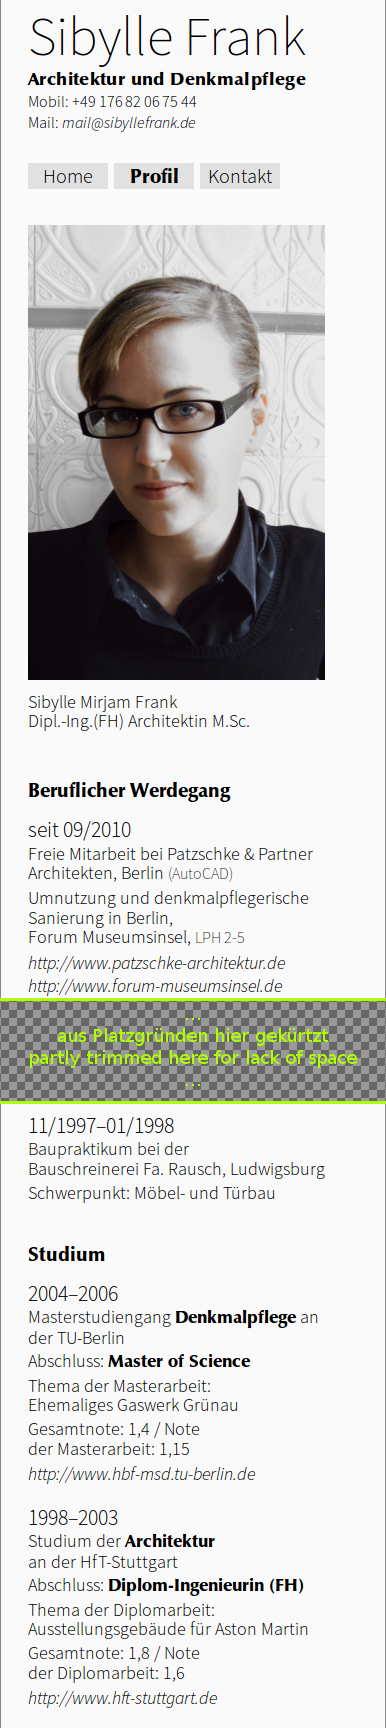 Small view of the website of Sibylle Frank